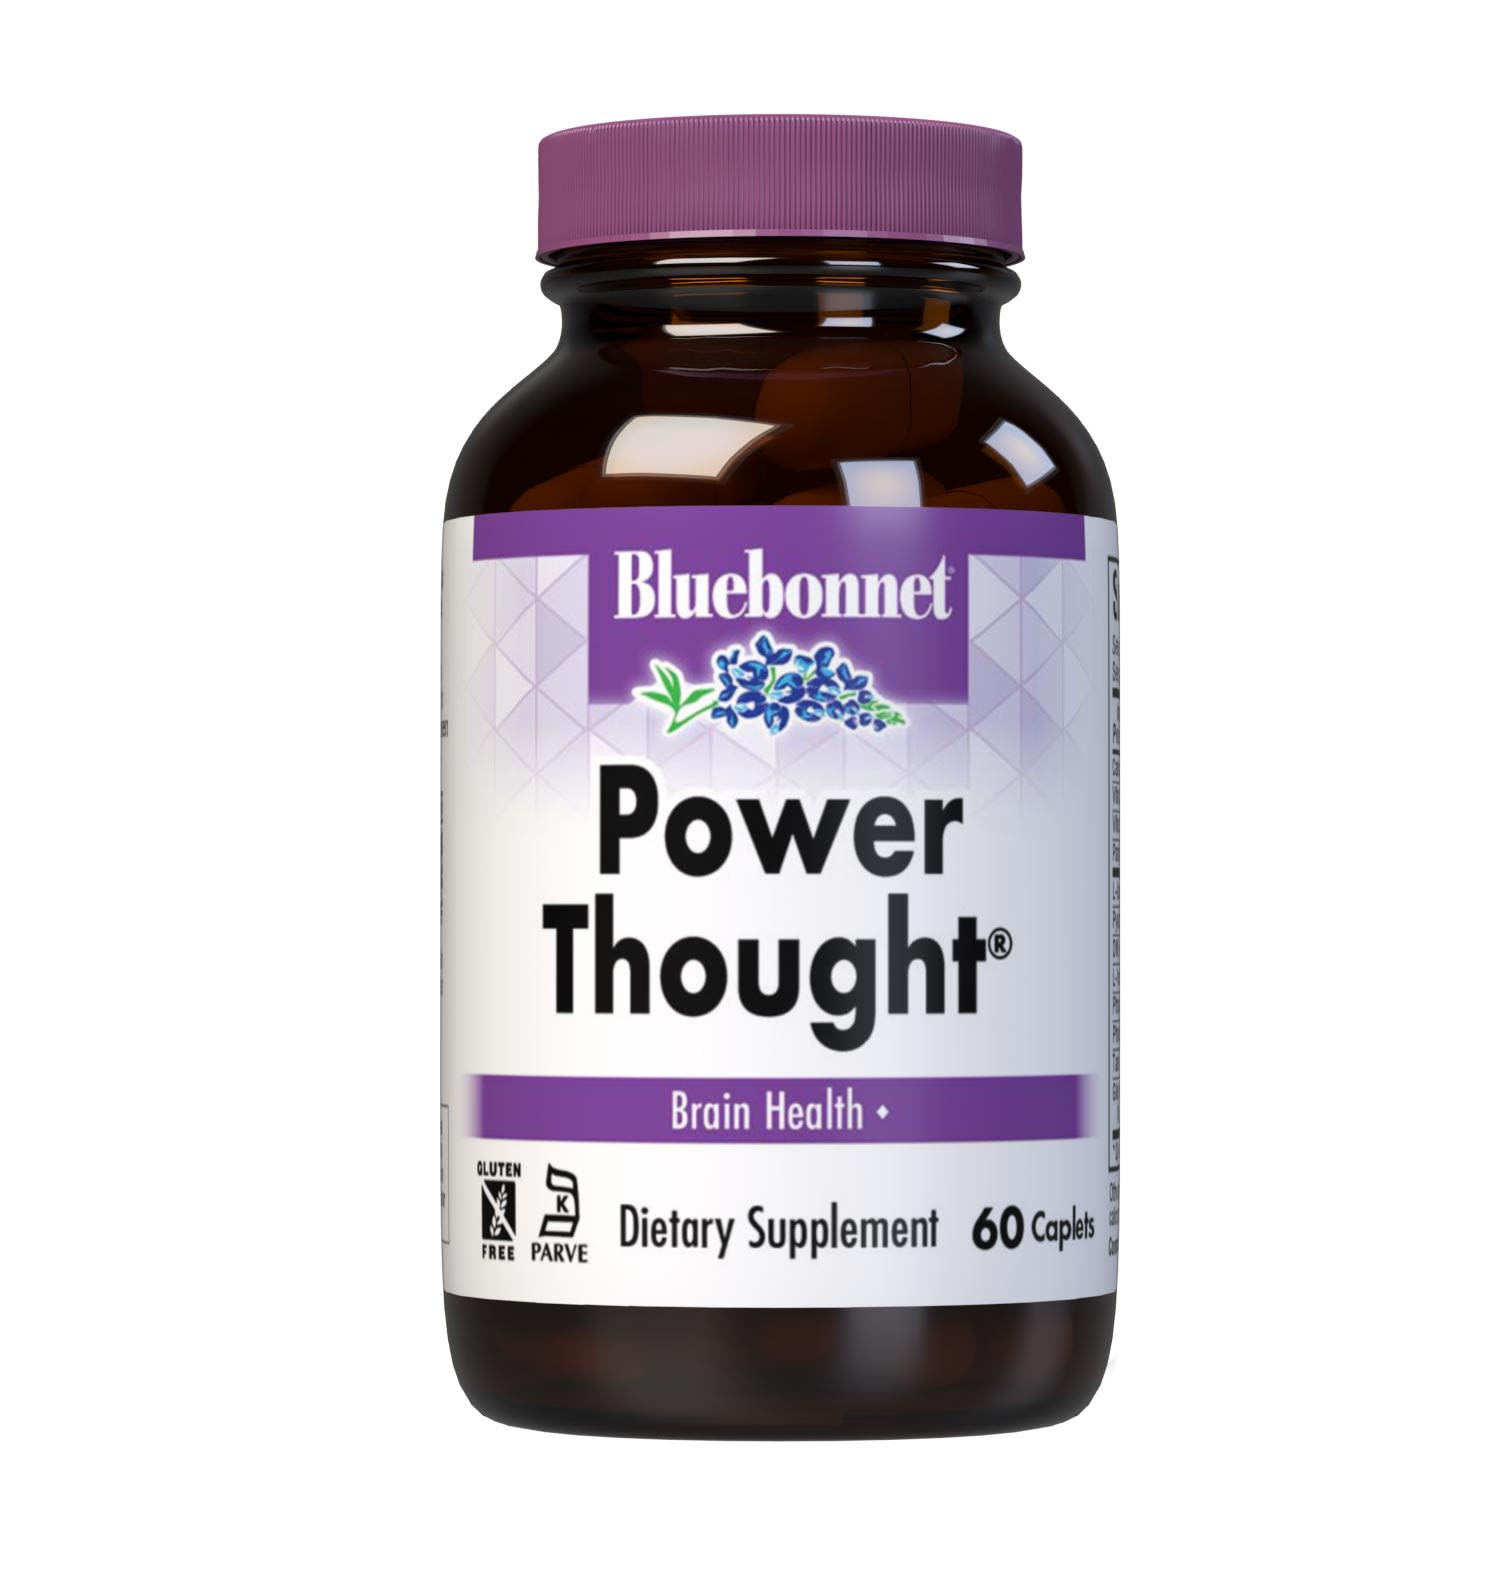 Bluebonnet’s Power Thought 60 Caplets are scientifically formulated with a powerful spectrum of highly advanced cognitive-enhancing nutrients, including sustainably-sourced botanicals, DMAE, phosphatidylserine and phosphatidylcholine, for optimal brain health. This complementary blend works to facilitate the communication between nerve cells, thereby enhancing the brain's ability to process, retain, and retrieve information for healthy cognitive function. #size_60 count